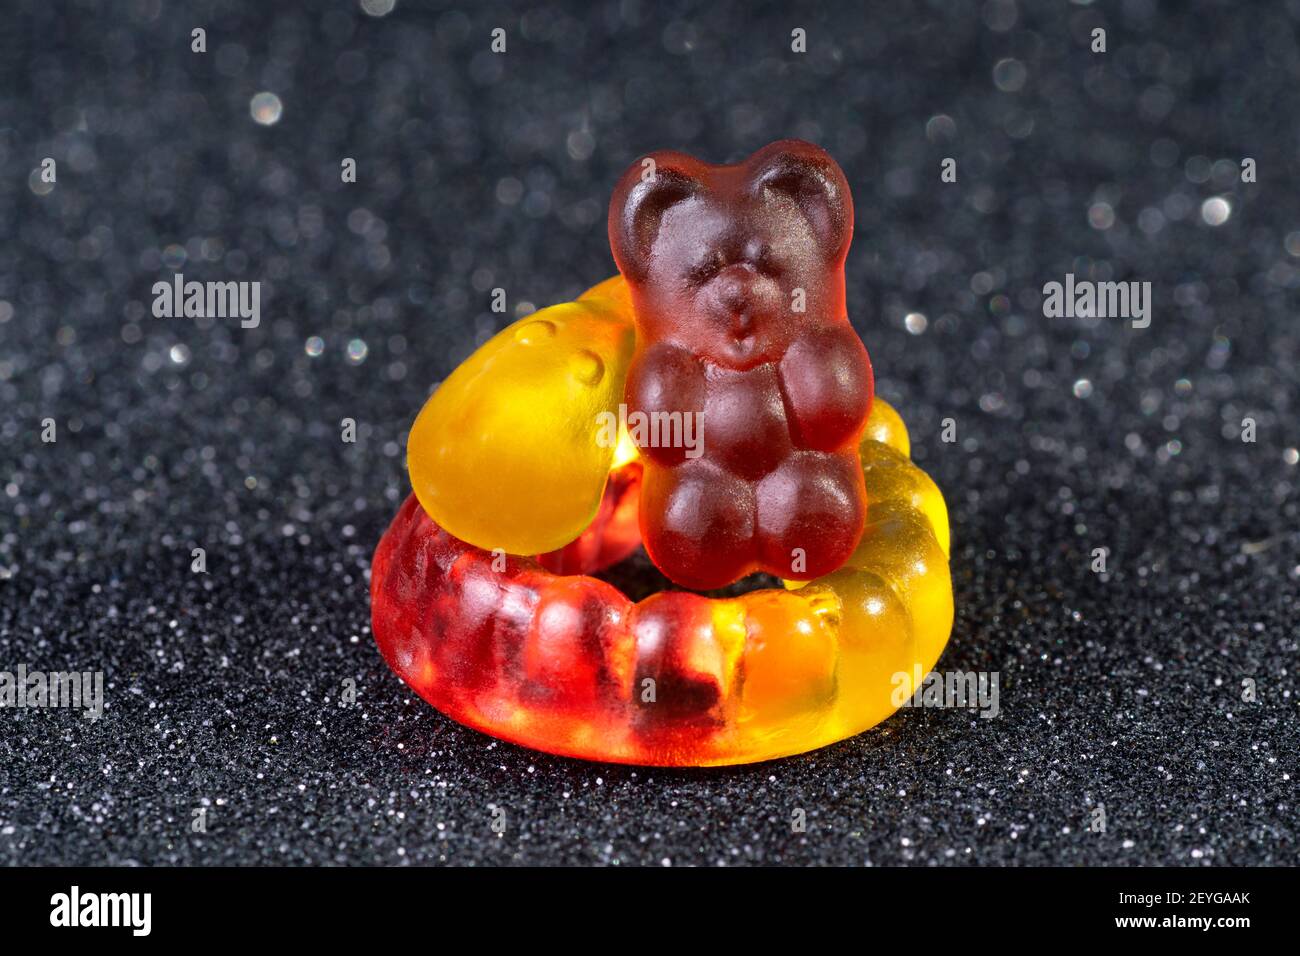 Close-up of a purple gummy bear sitting on a curled yellow-red gummy worm on a glittering blurred background. Stock Photo